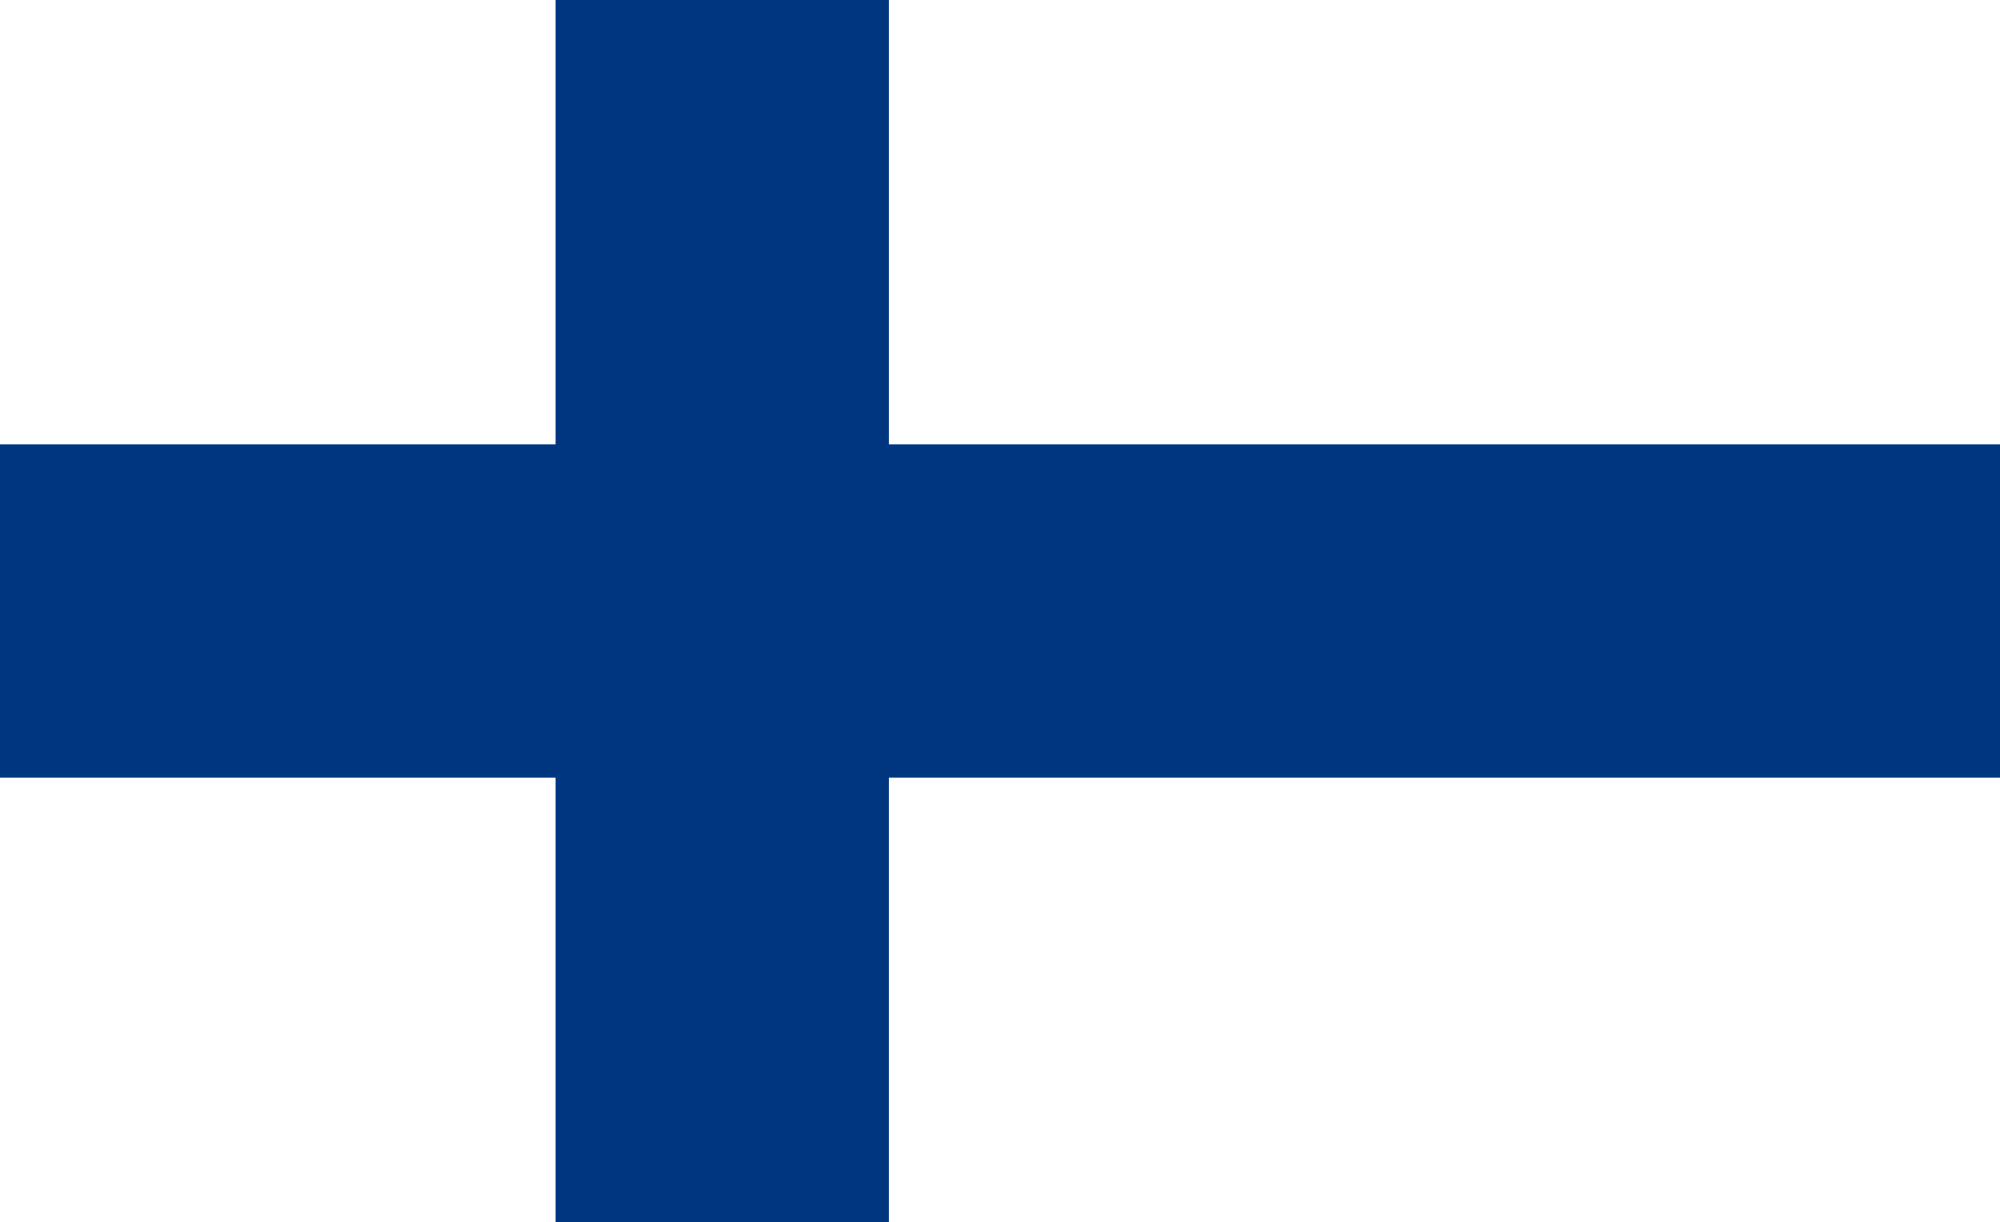 Finland brings to 55 the number of future Parties to the Minamata Convention